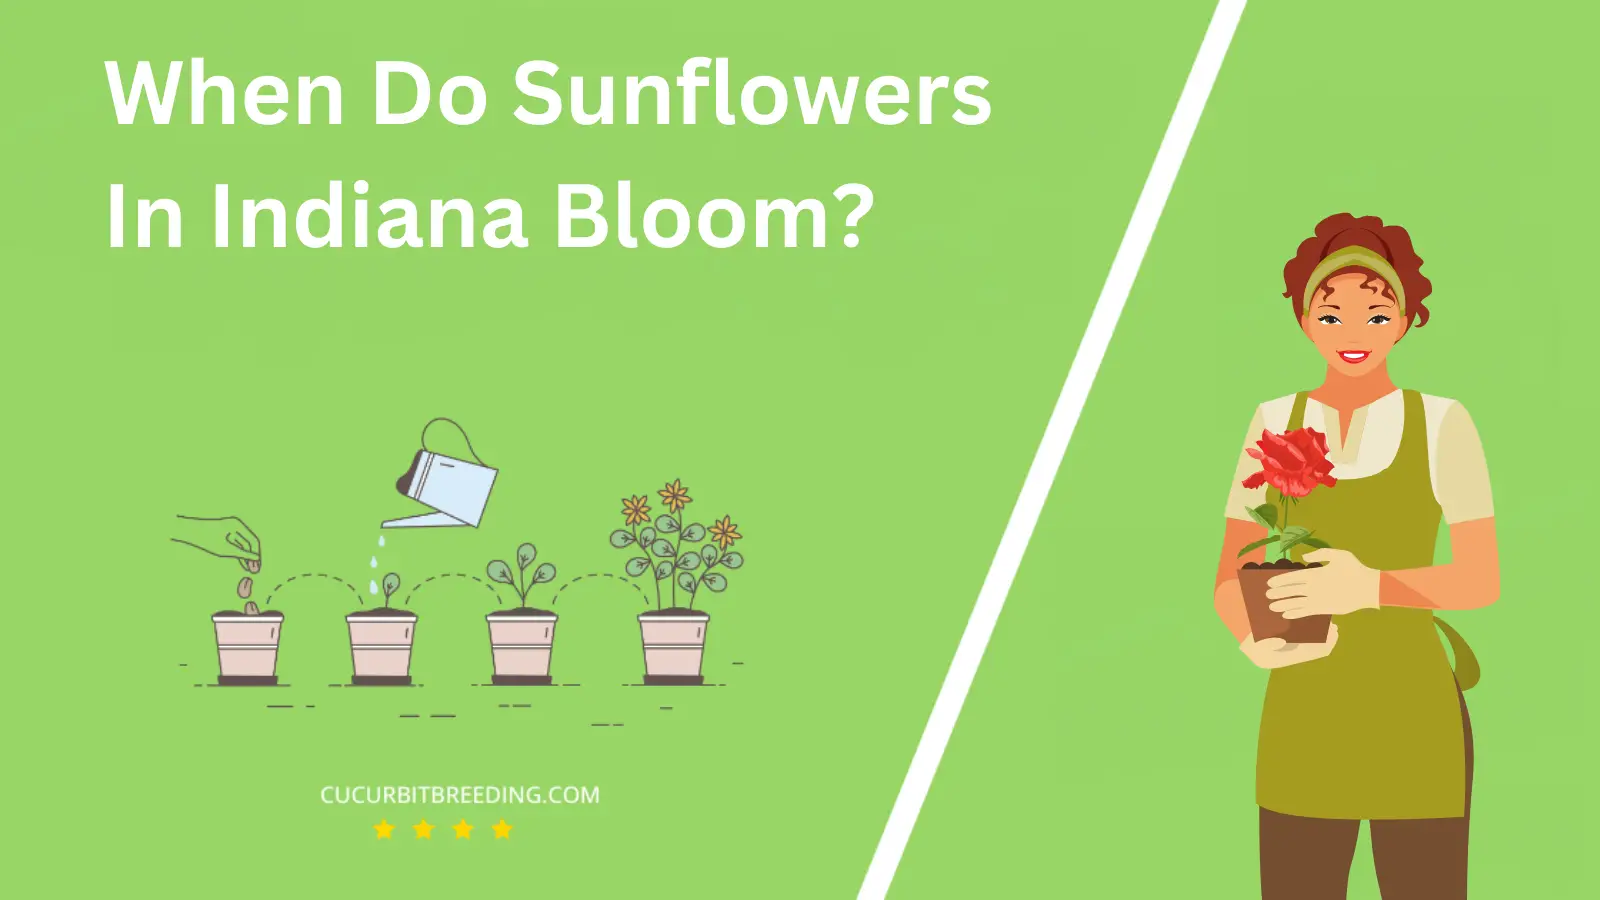 When Do Sunflowers In Indiana Bloom?